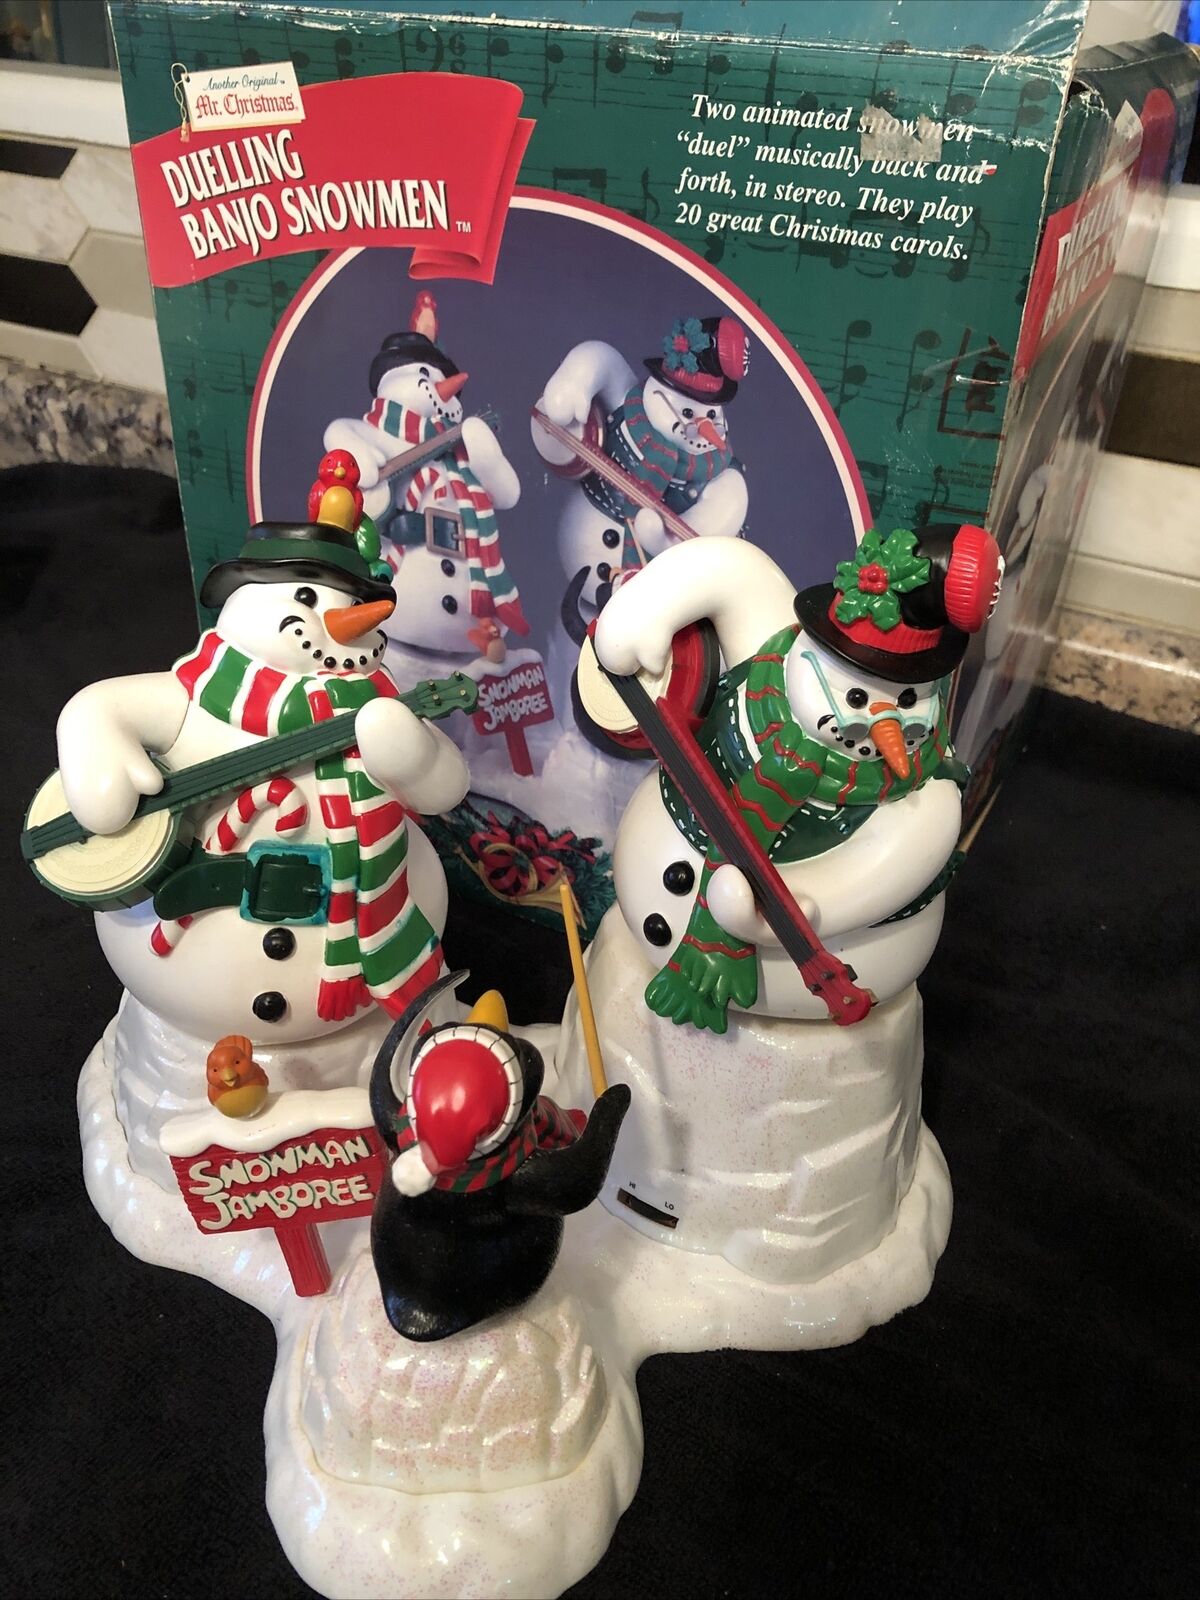 VINTAGE MR. CHRISTMAS DUELING BANJO SNOWMEN PLAYS 20 DIFFERENT SONG NOT Animated